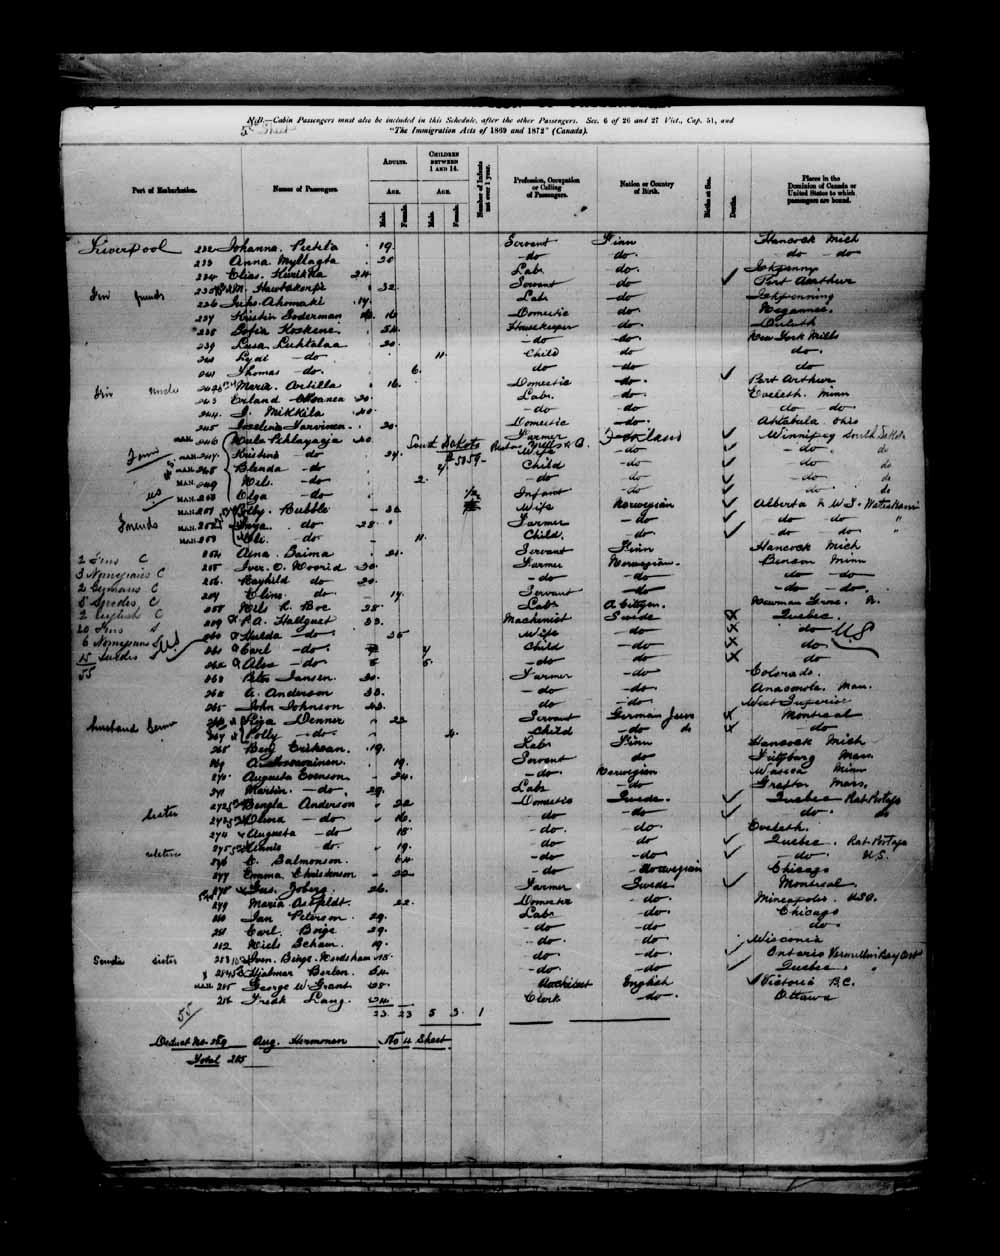 Digitized page of Quebec Passenger Lists for Image No.: e003651583